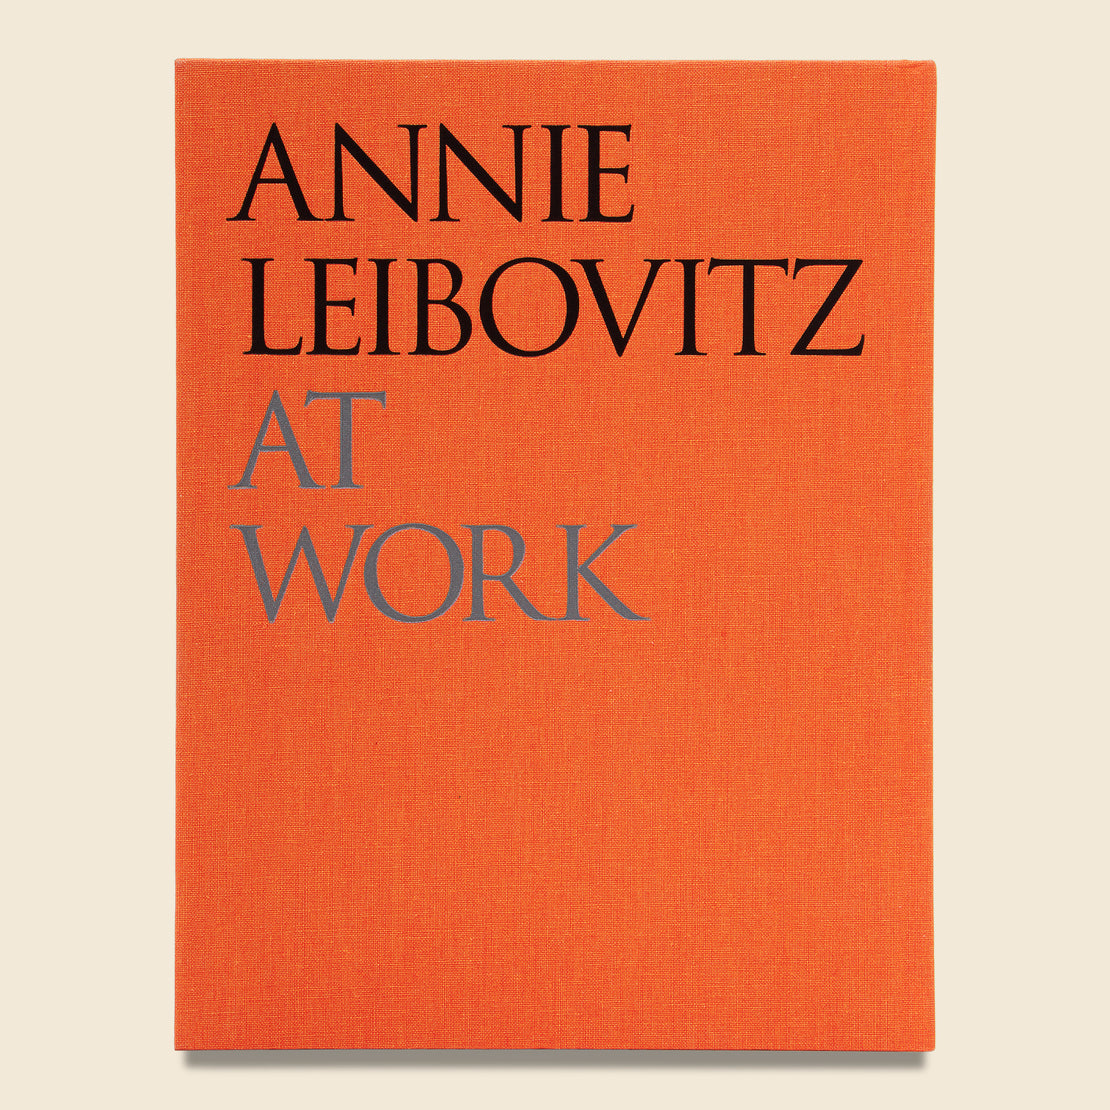 Annie Leibovitz At Work - Bookstore - STAG Provisions - Home - Library - Book